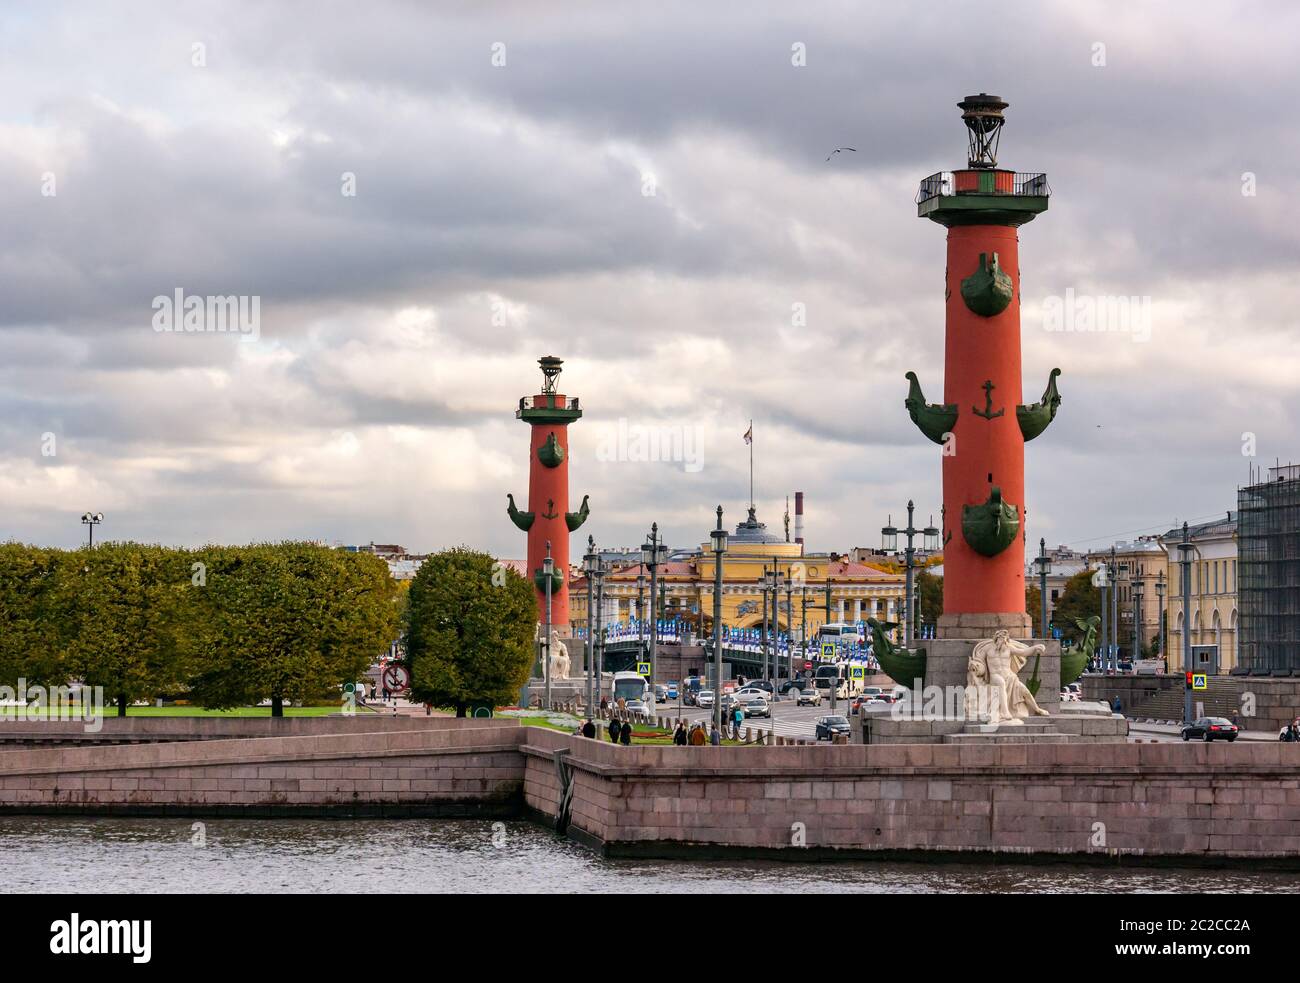 Giant rostral or victory columns on The Spit, Vasilyevsky Island, St Petersburg, Russia Stock Photo